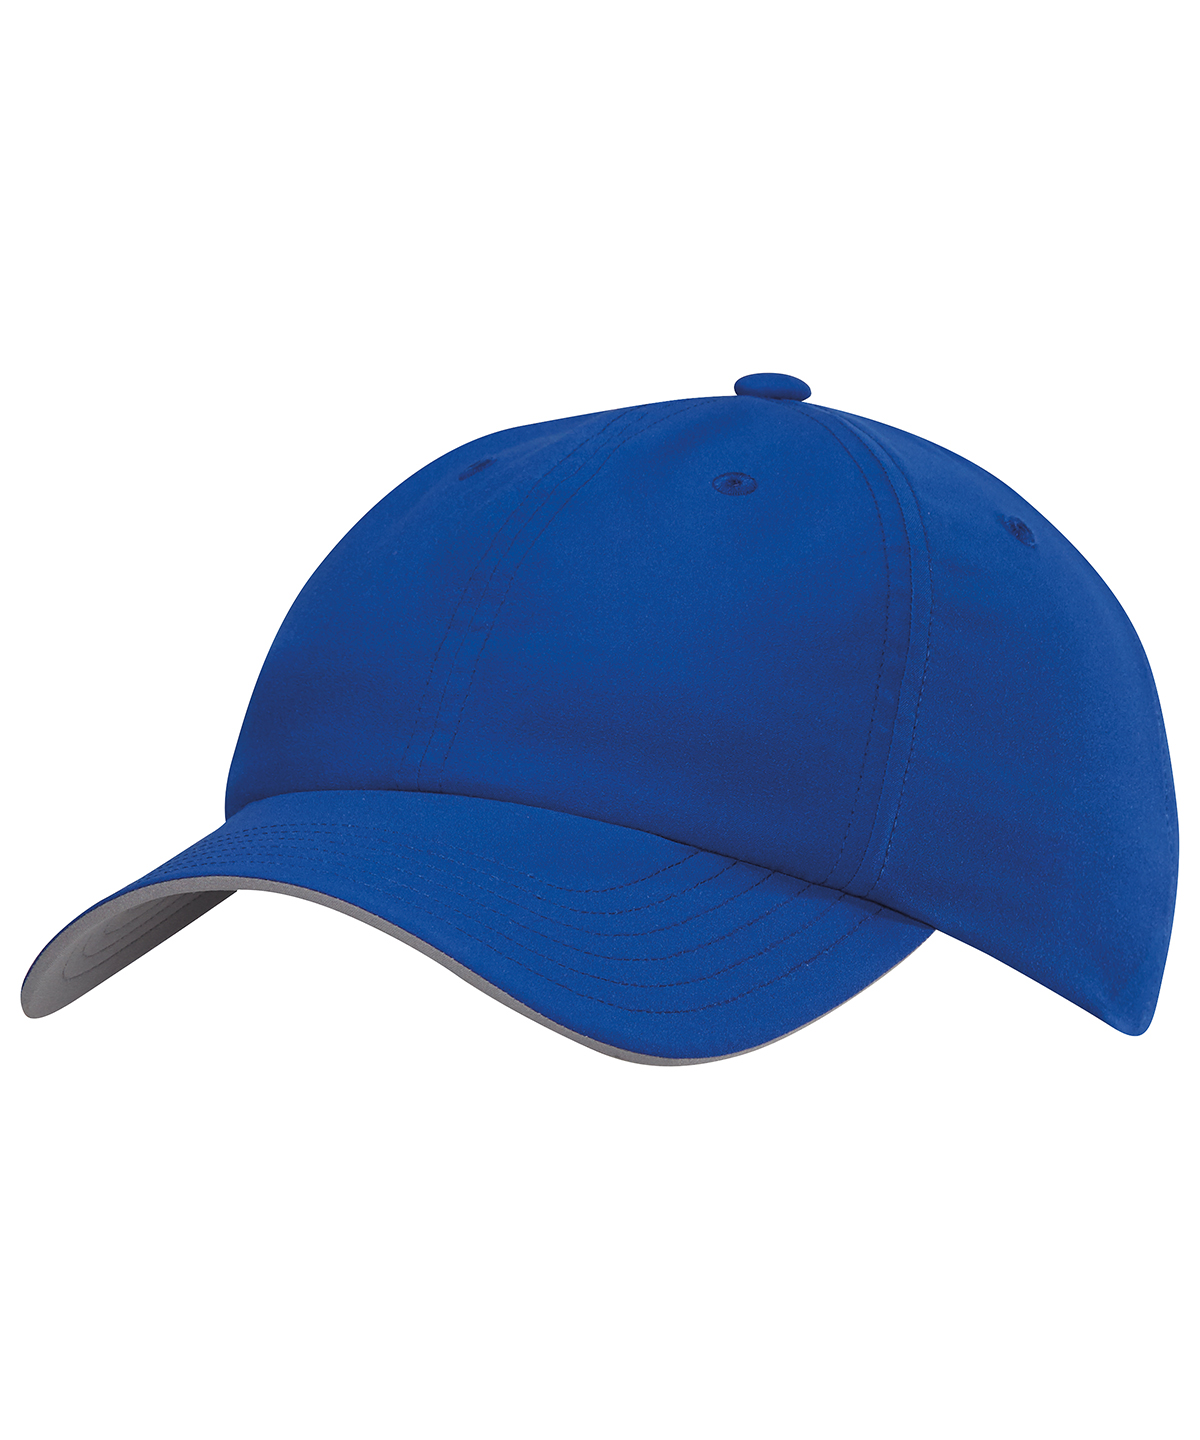 Performance Cap Bold Blue Size One Size